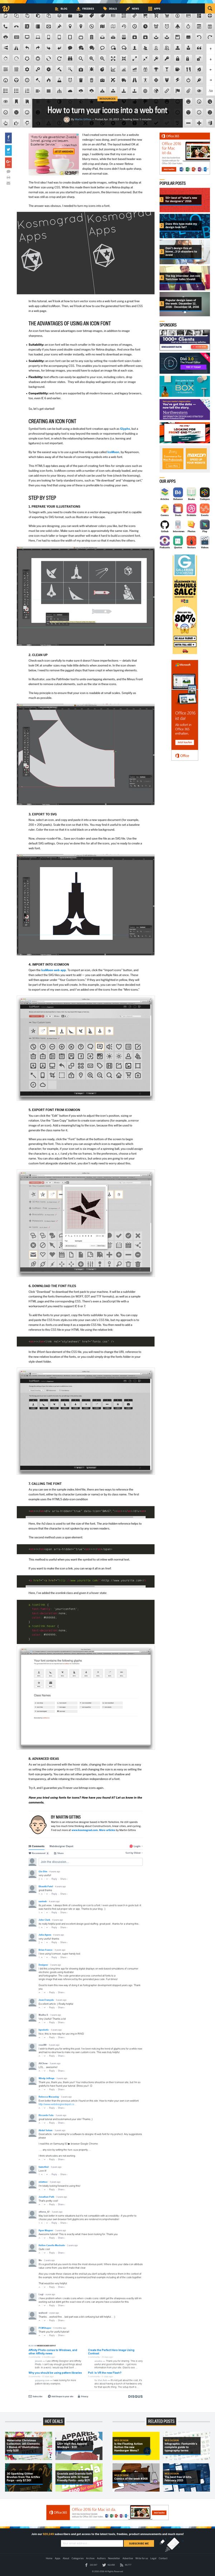 webdesignerdepot.com/2013/04/how-to-turn-your-icons-into-a-web-font/